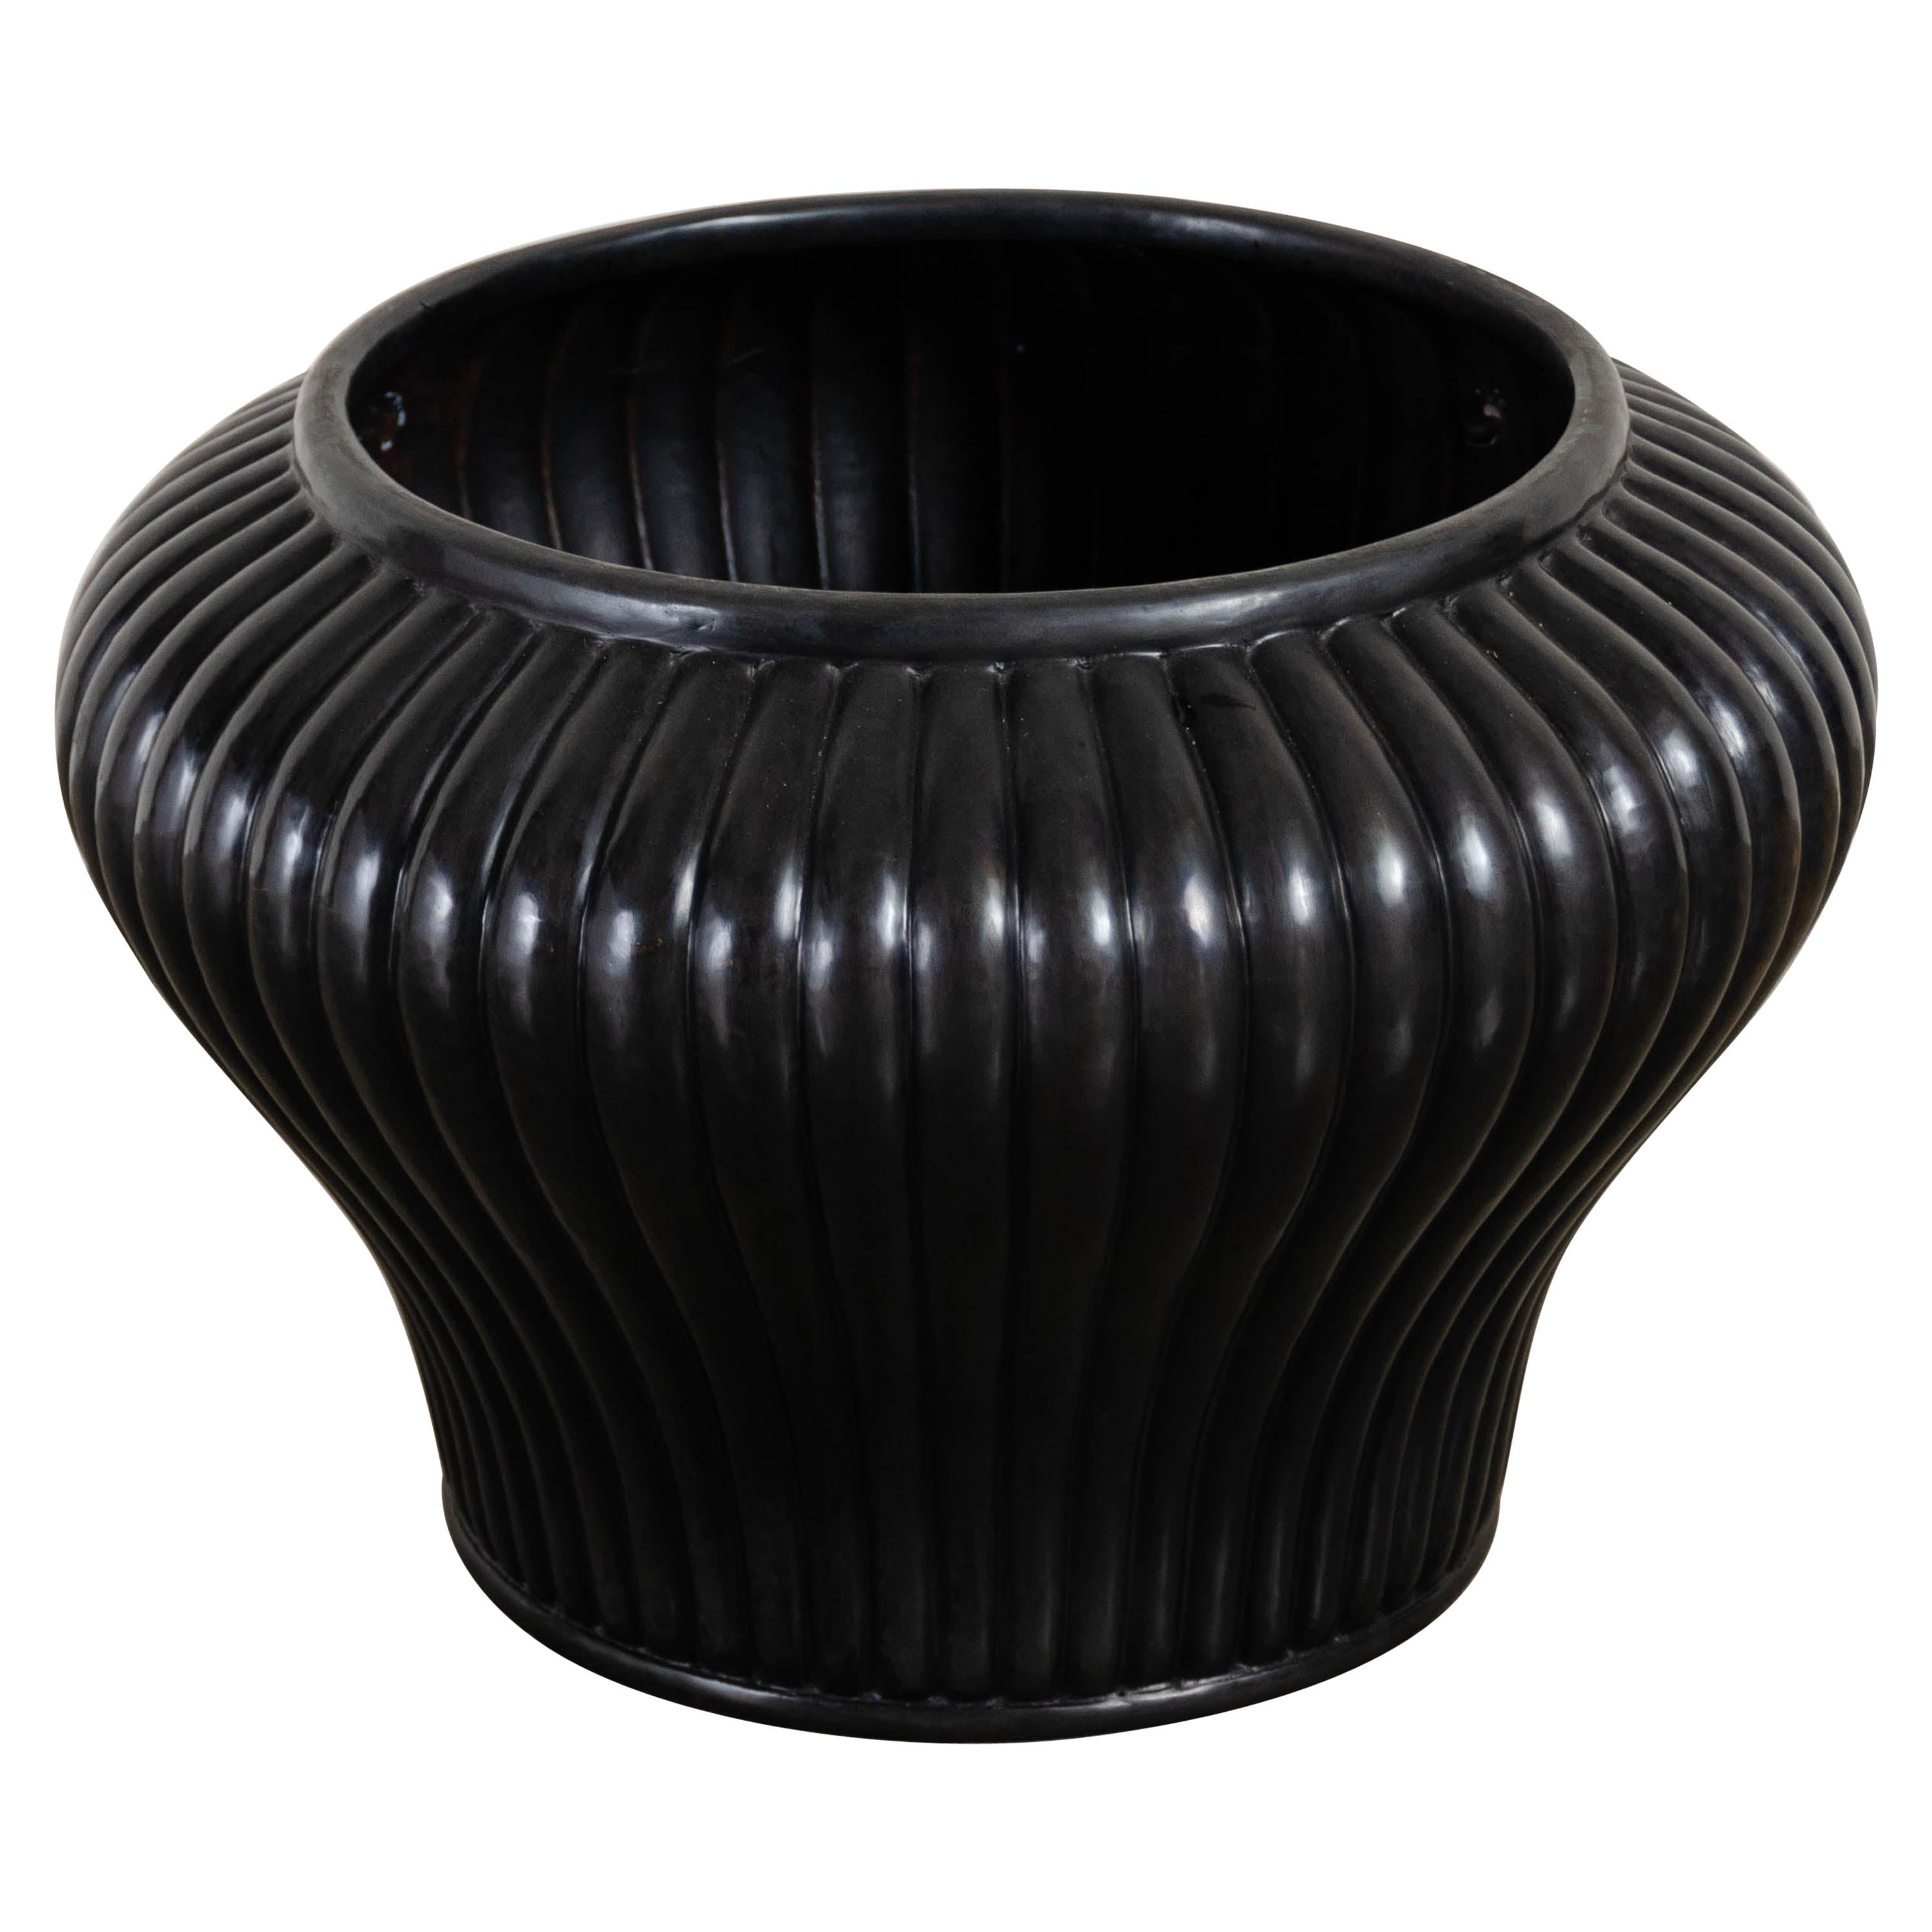 Chrysanthemum Lobe Kung Pot, Black Copper by Robert Kuo, Hand Repousse, Limited